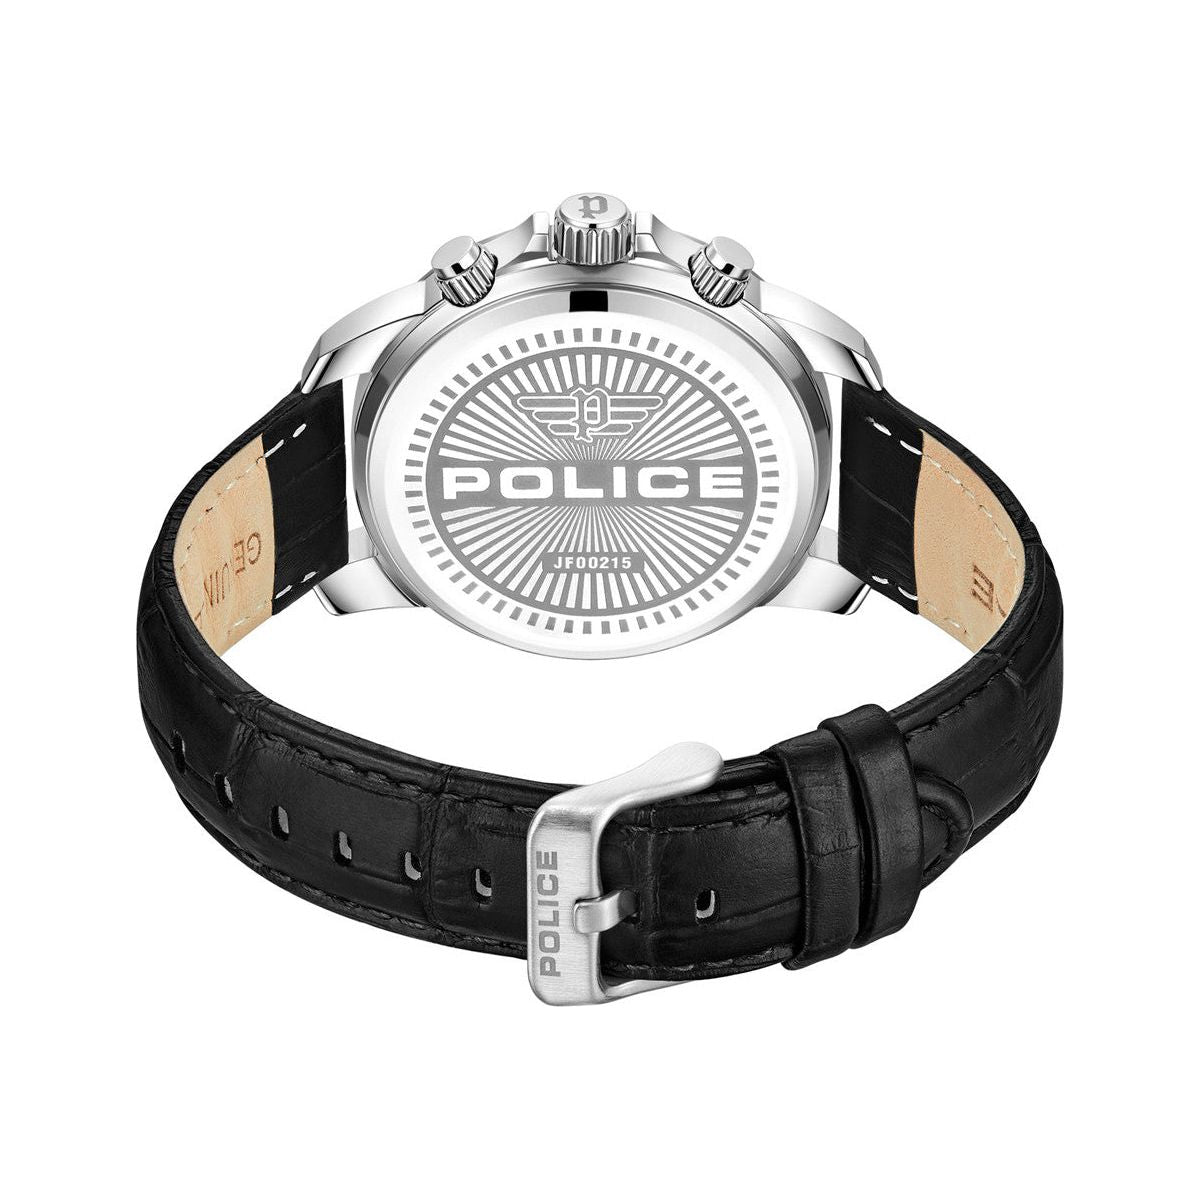 POLICE POLICE WATCHES Mod. PEWJF0021503 WATCHES police-watches-mod-pewjf0021503